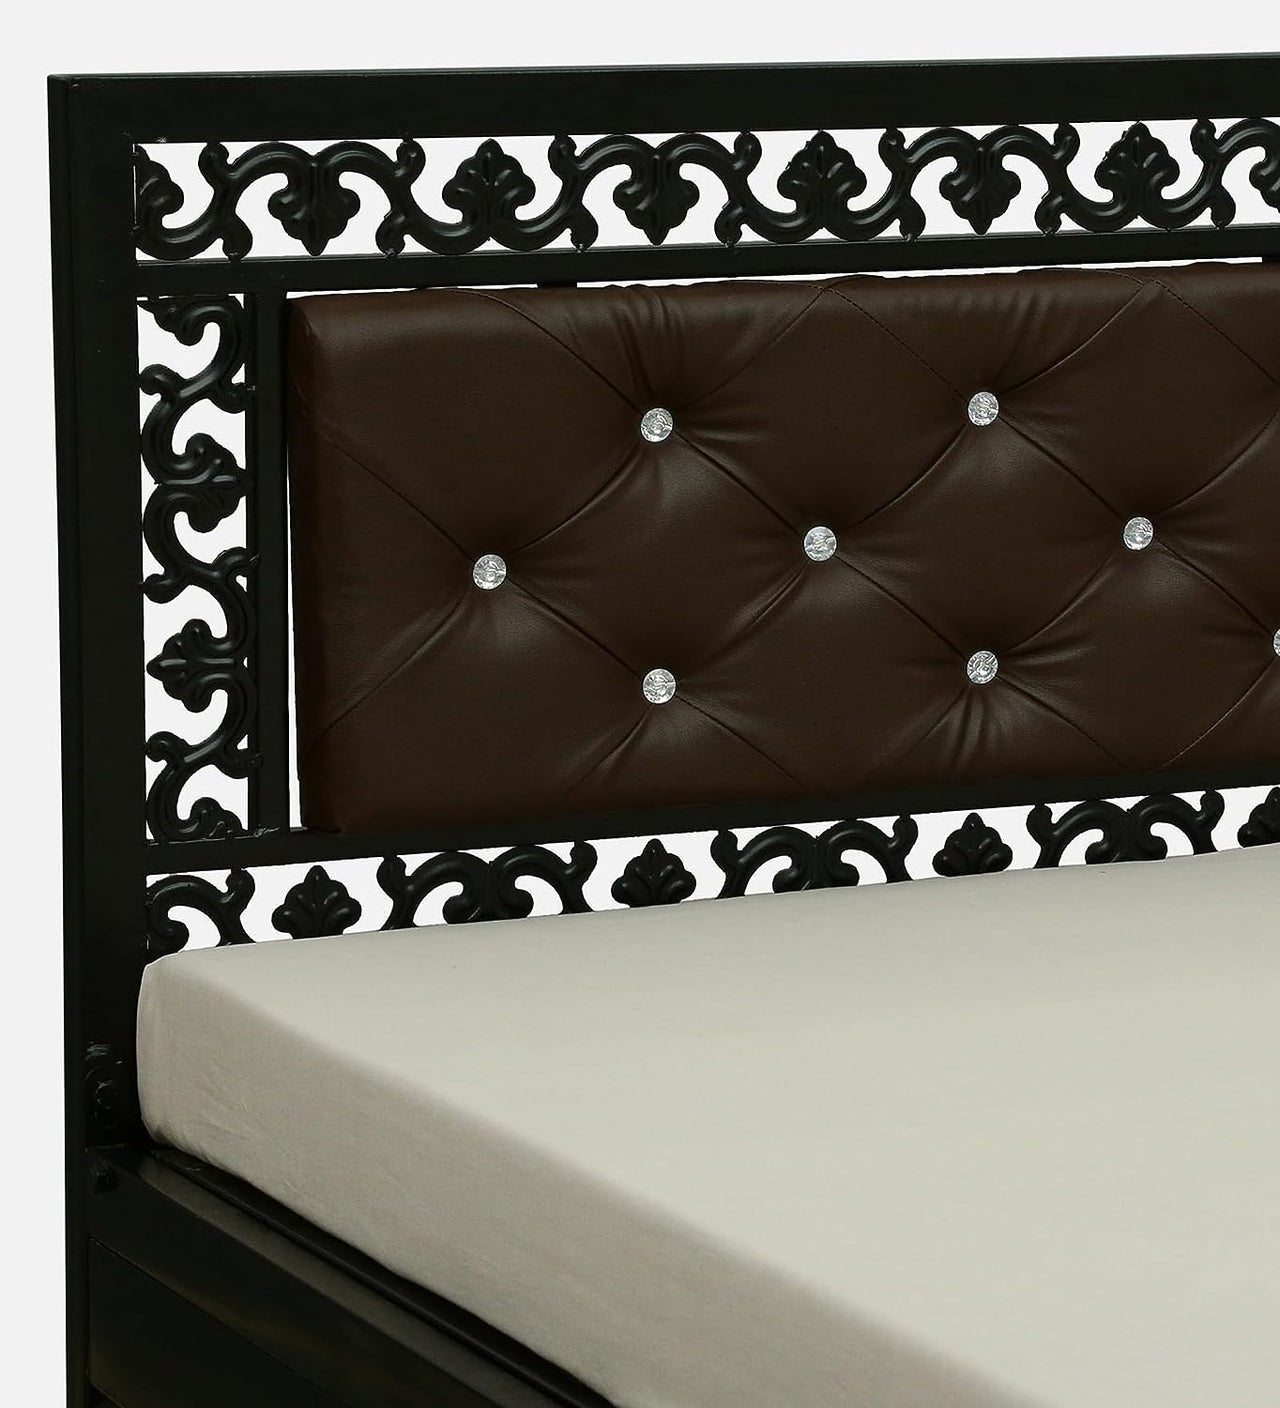 Cuba Hydraulic Queen Metal Bed with Storage and Brown Cushion Headrest (Color - Black)